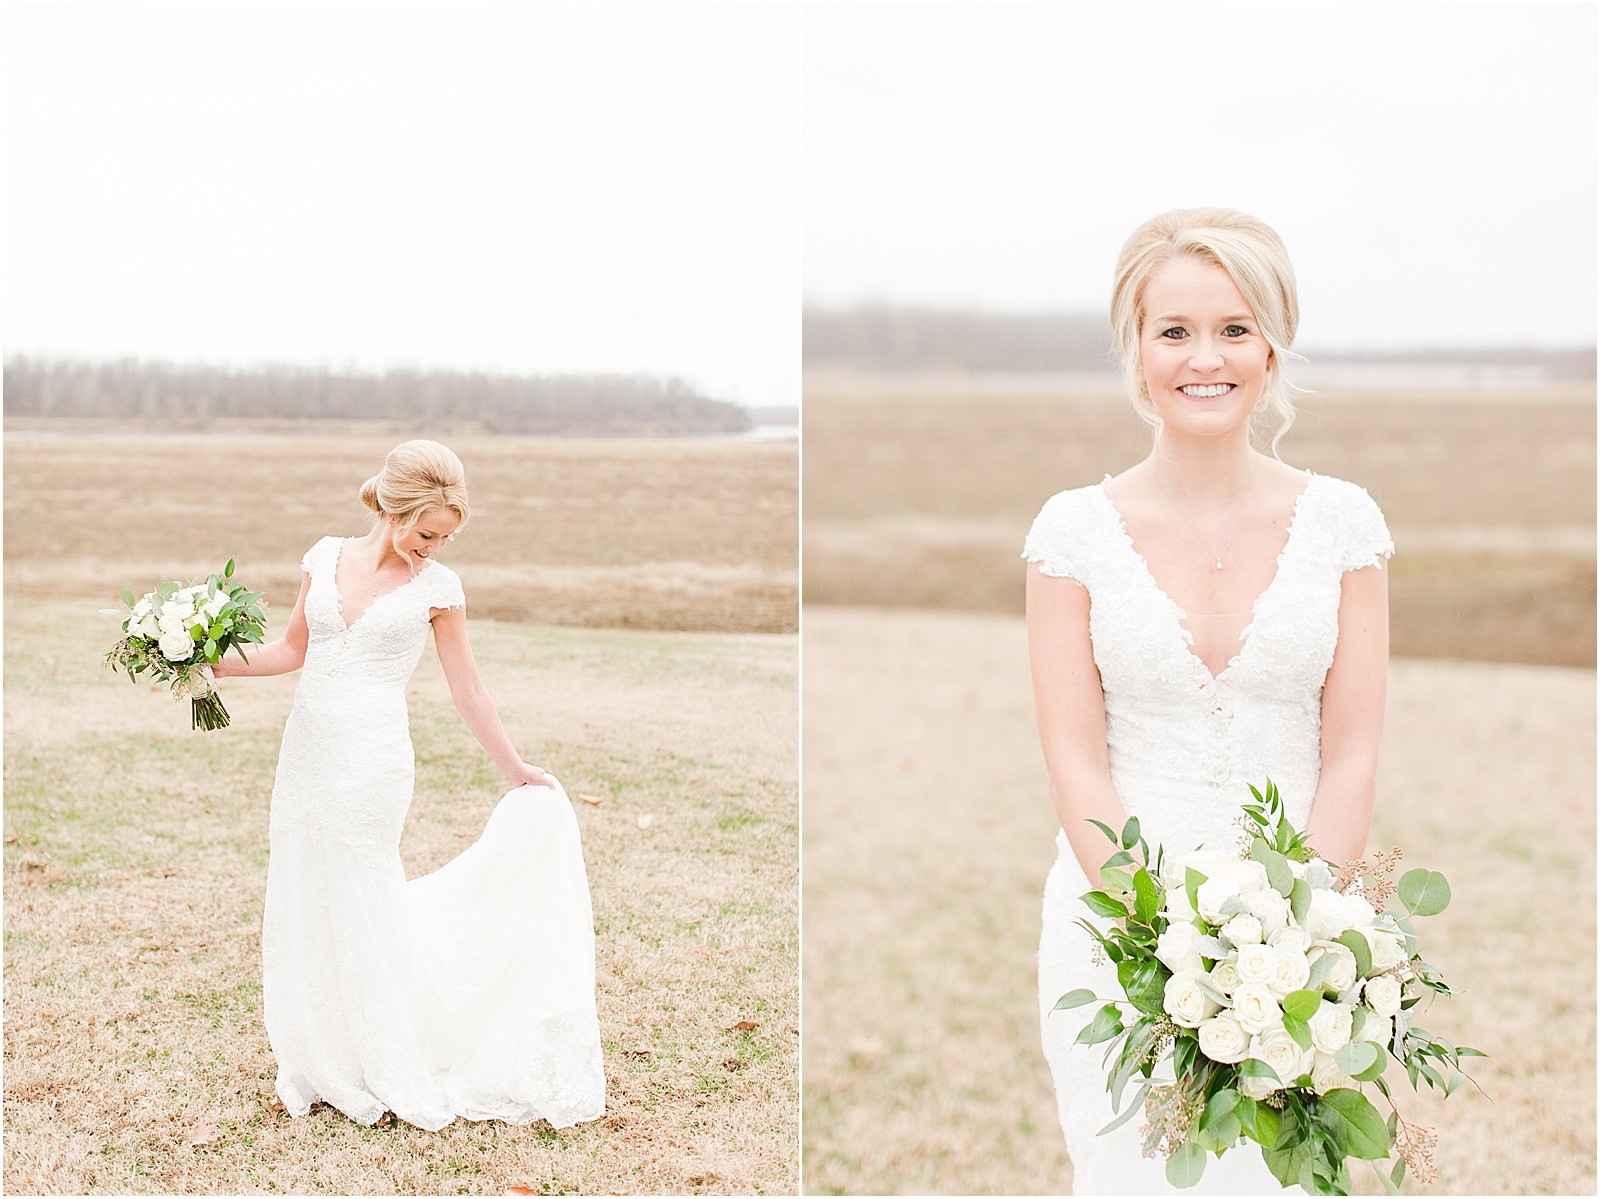 A Classic Winter Wedding in New Harmony | Rachel and Ryan | Bret and Brandie Photography 0088.jpg